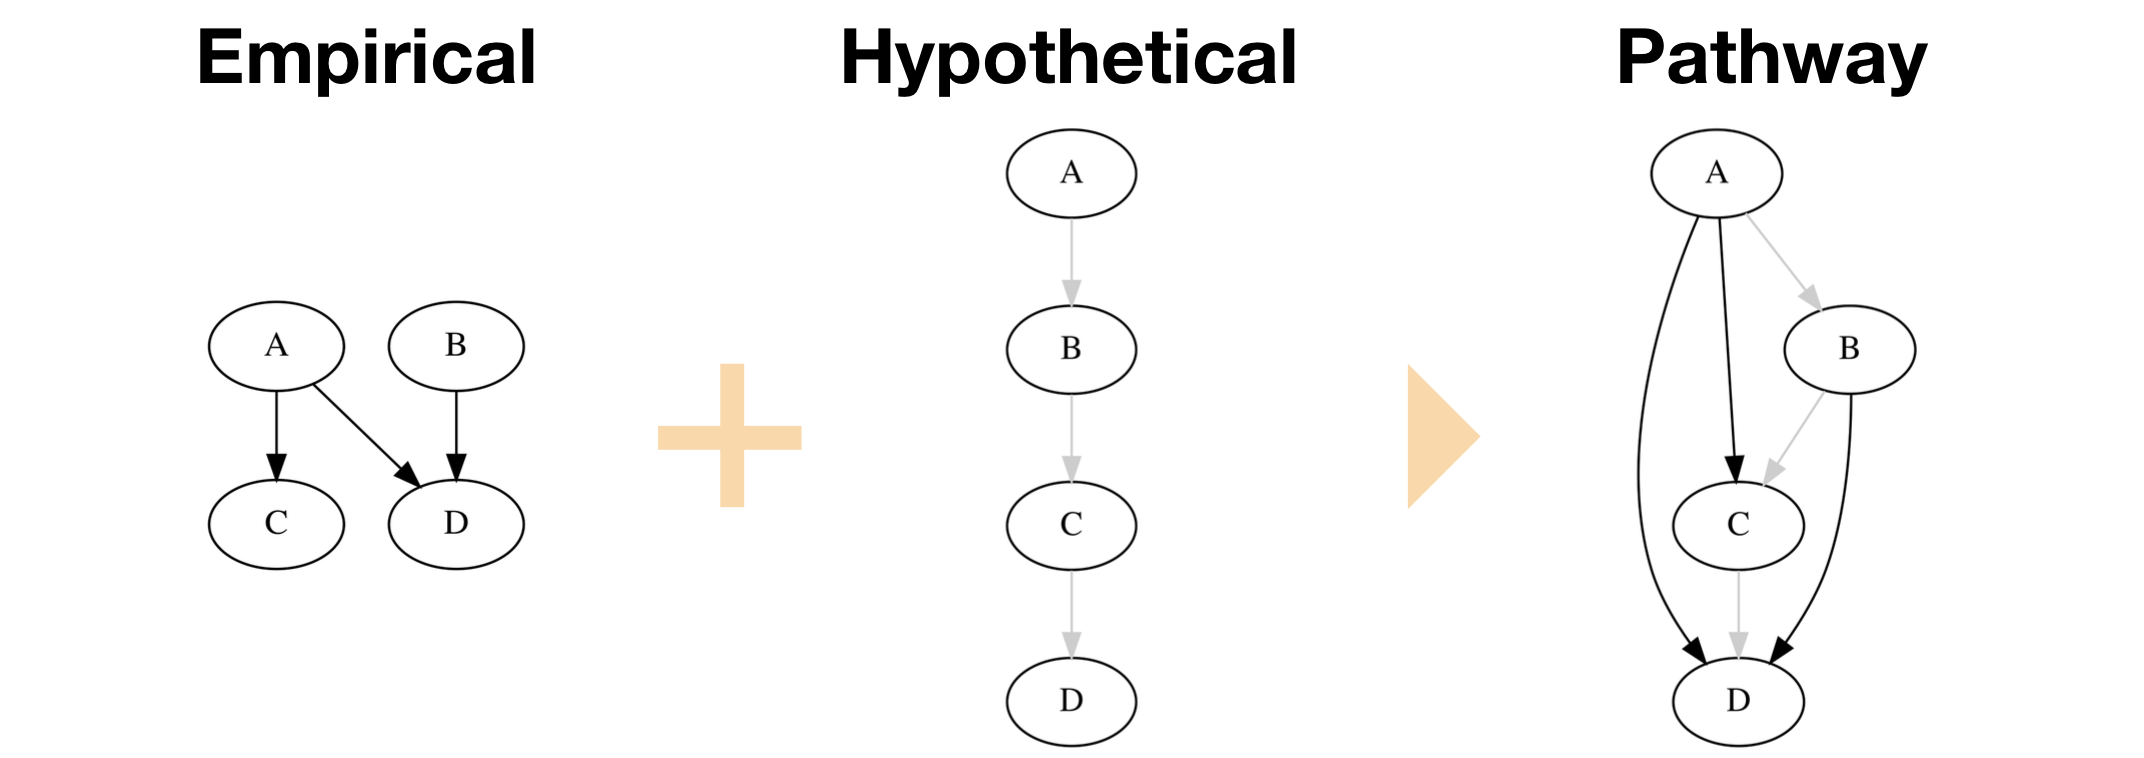 An illustration of our new feature to represent hypothetical causal relations